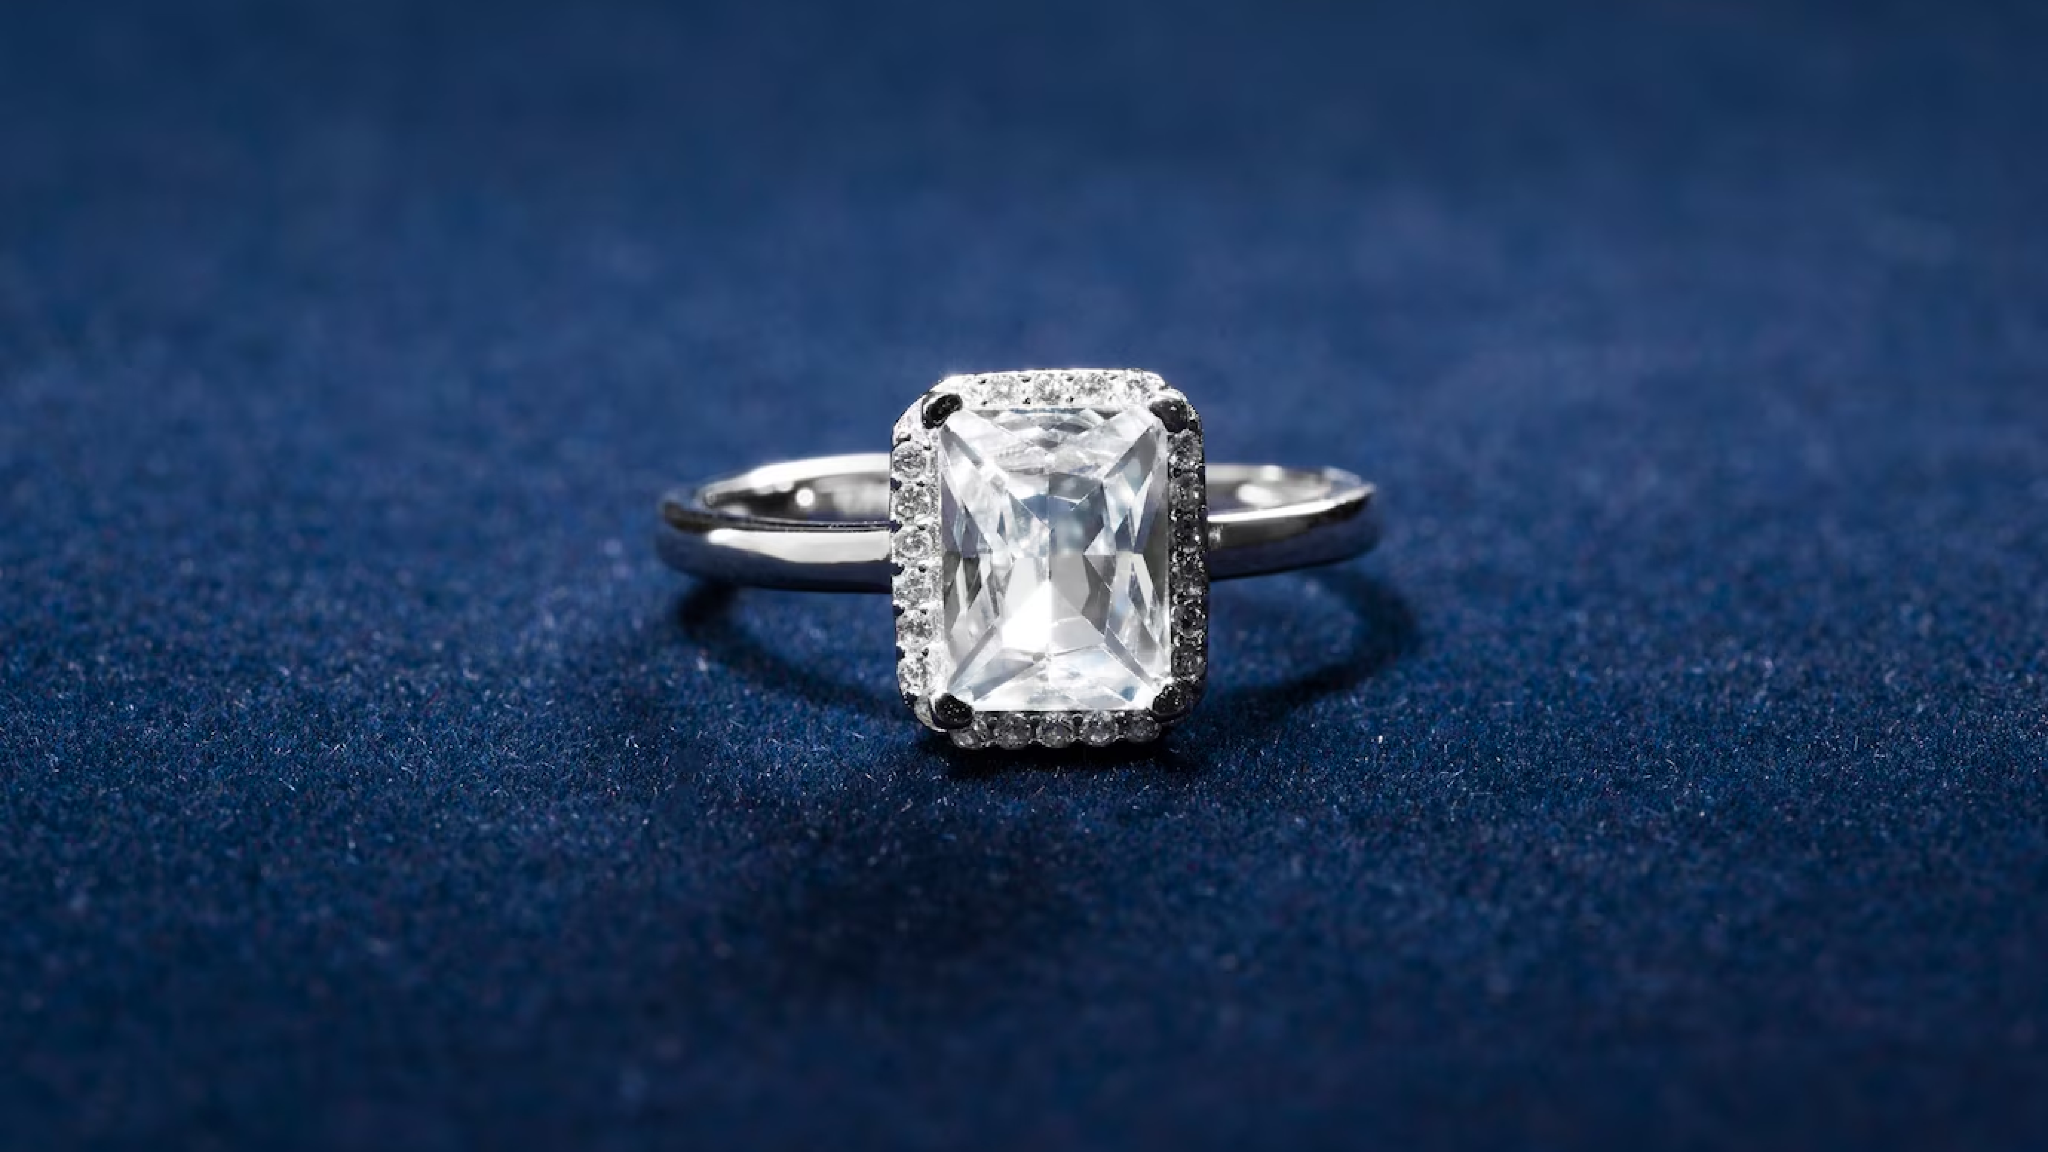 What are The Benefits of Buying Diamonds at Loose Grown Diamond?